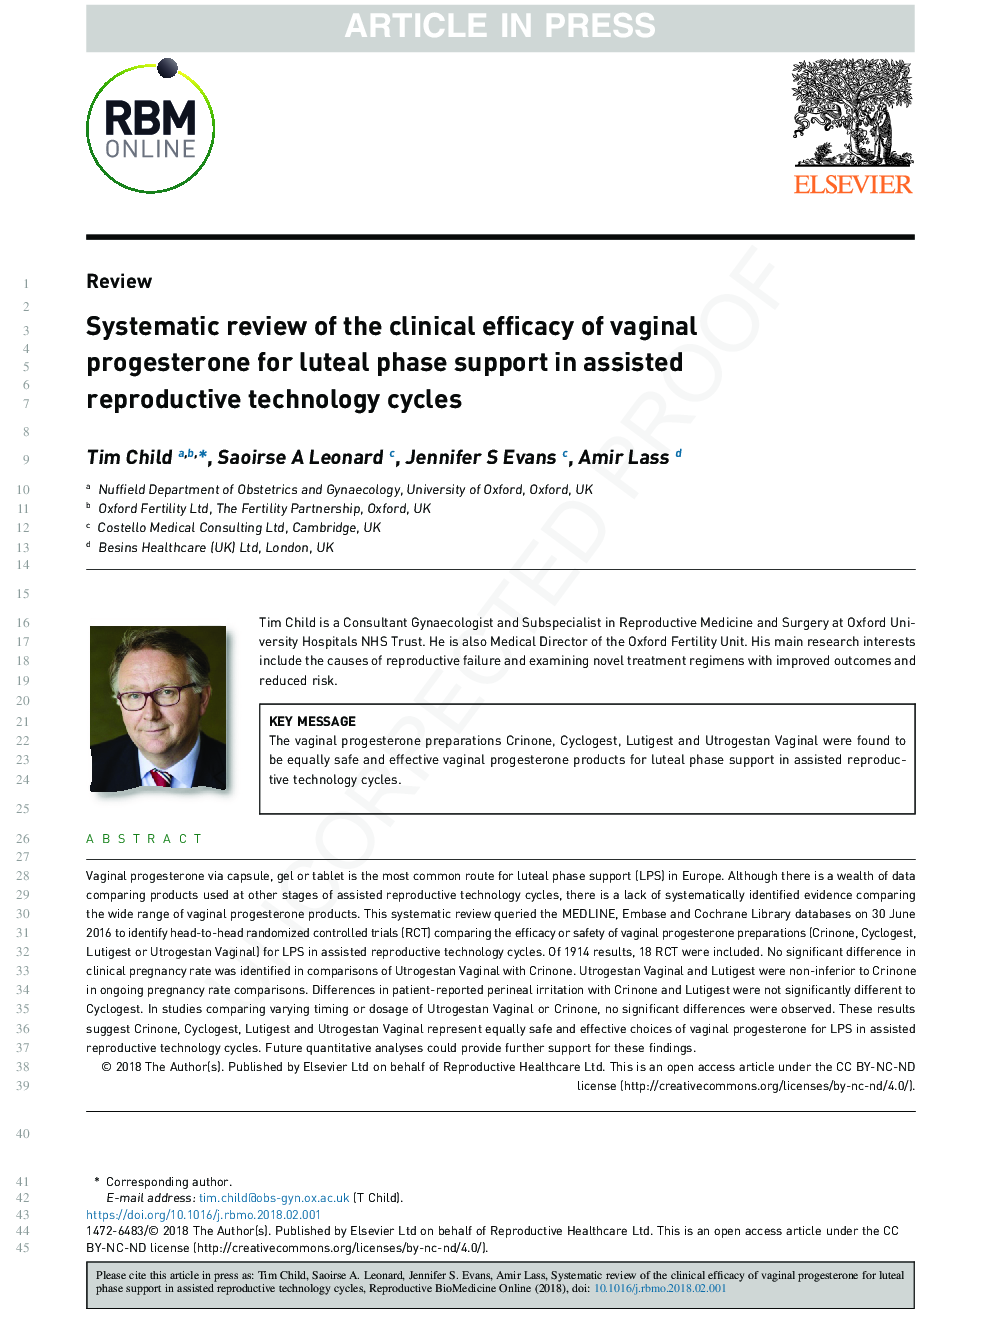 Systematic review of the clinical efficacy of vaginal progesterone for luteal phase support in assisted reproductive technology cycles